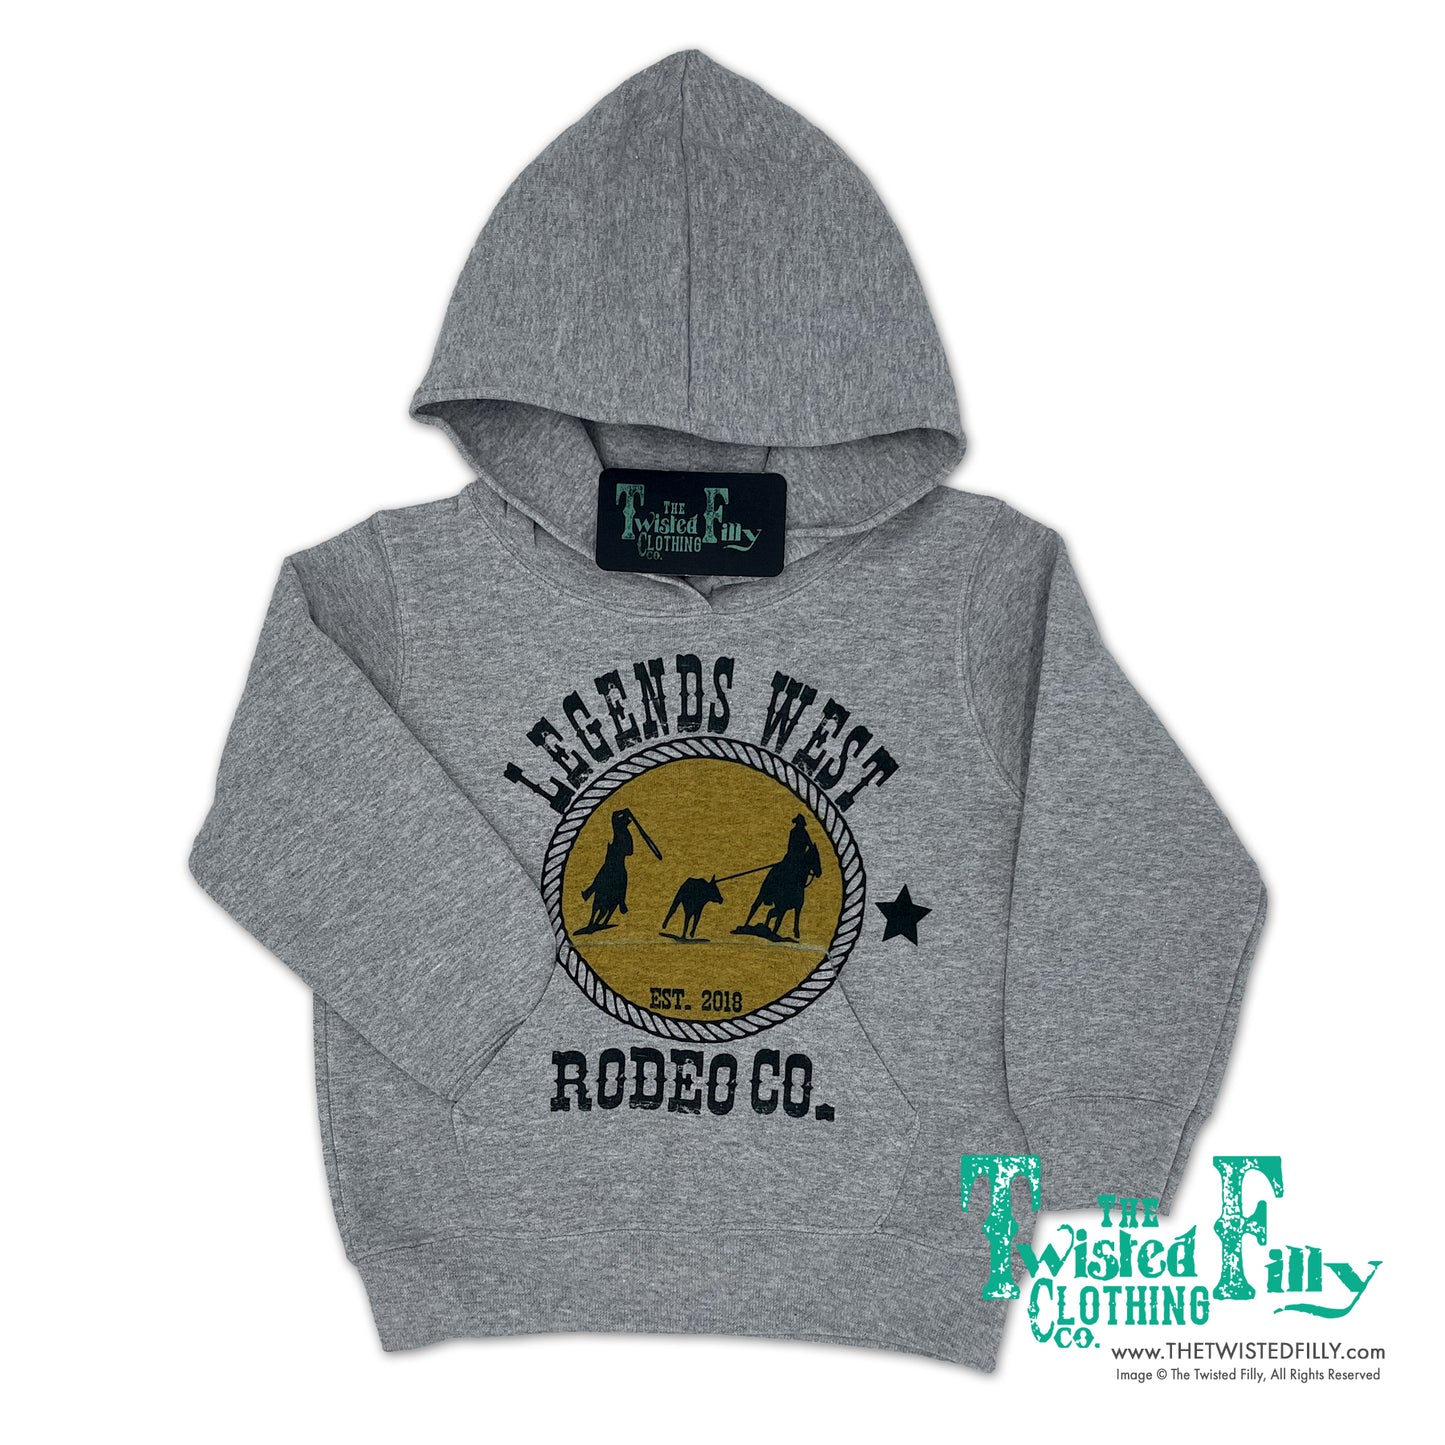 Legends West Rodeo Co. Team Roper - Toddler Hoodie - Gray